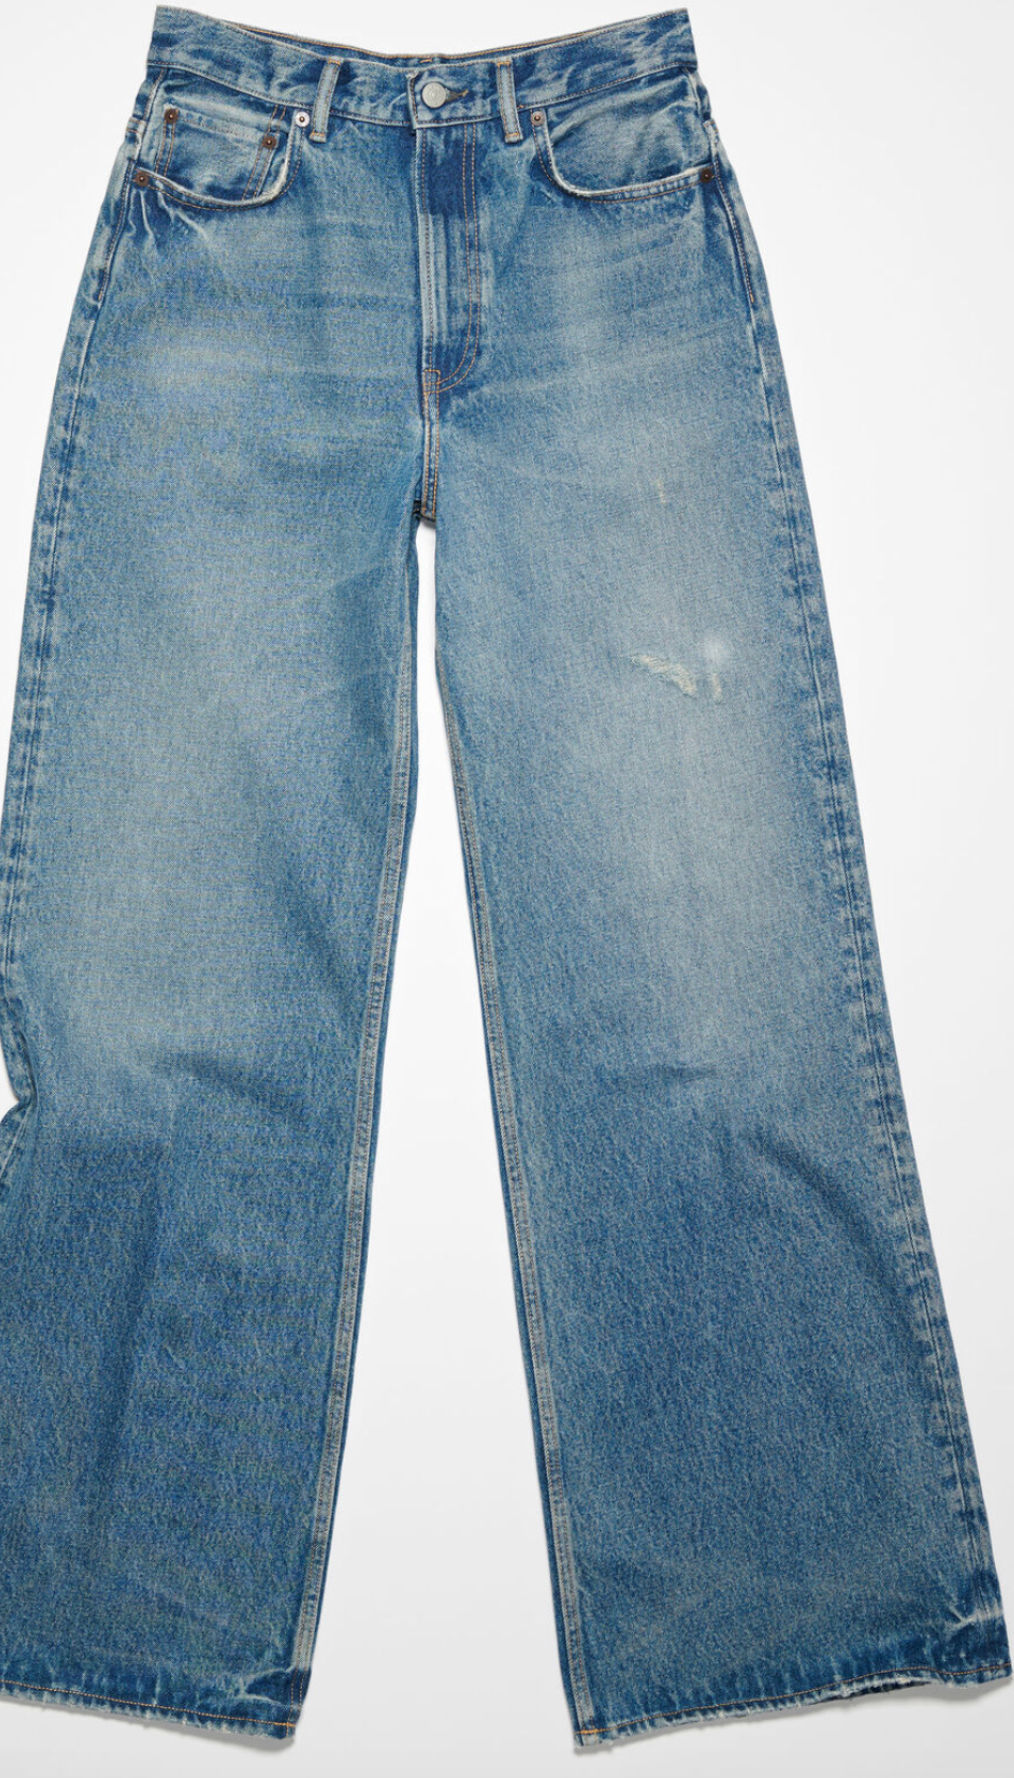 Acne Studios - Relaxed fit jeans - 2022 - Mid blue